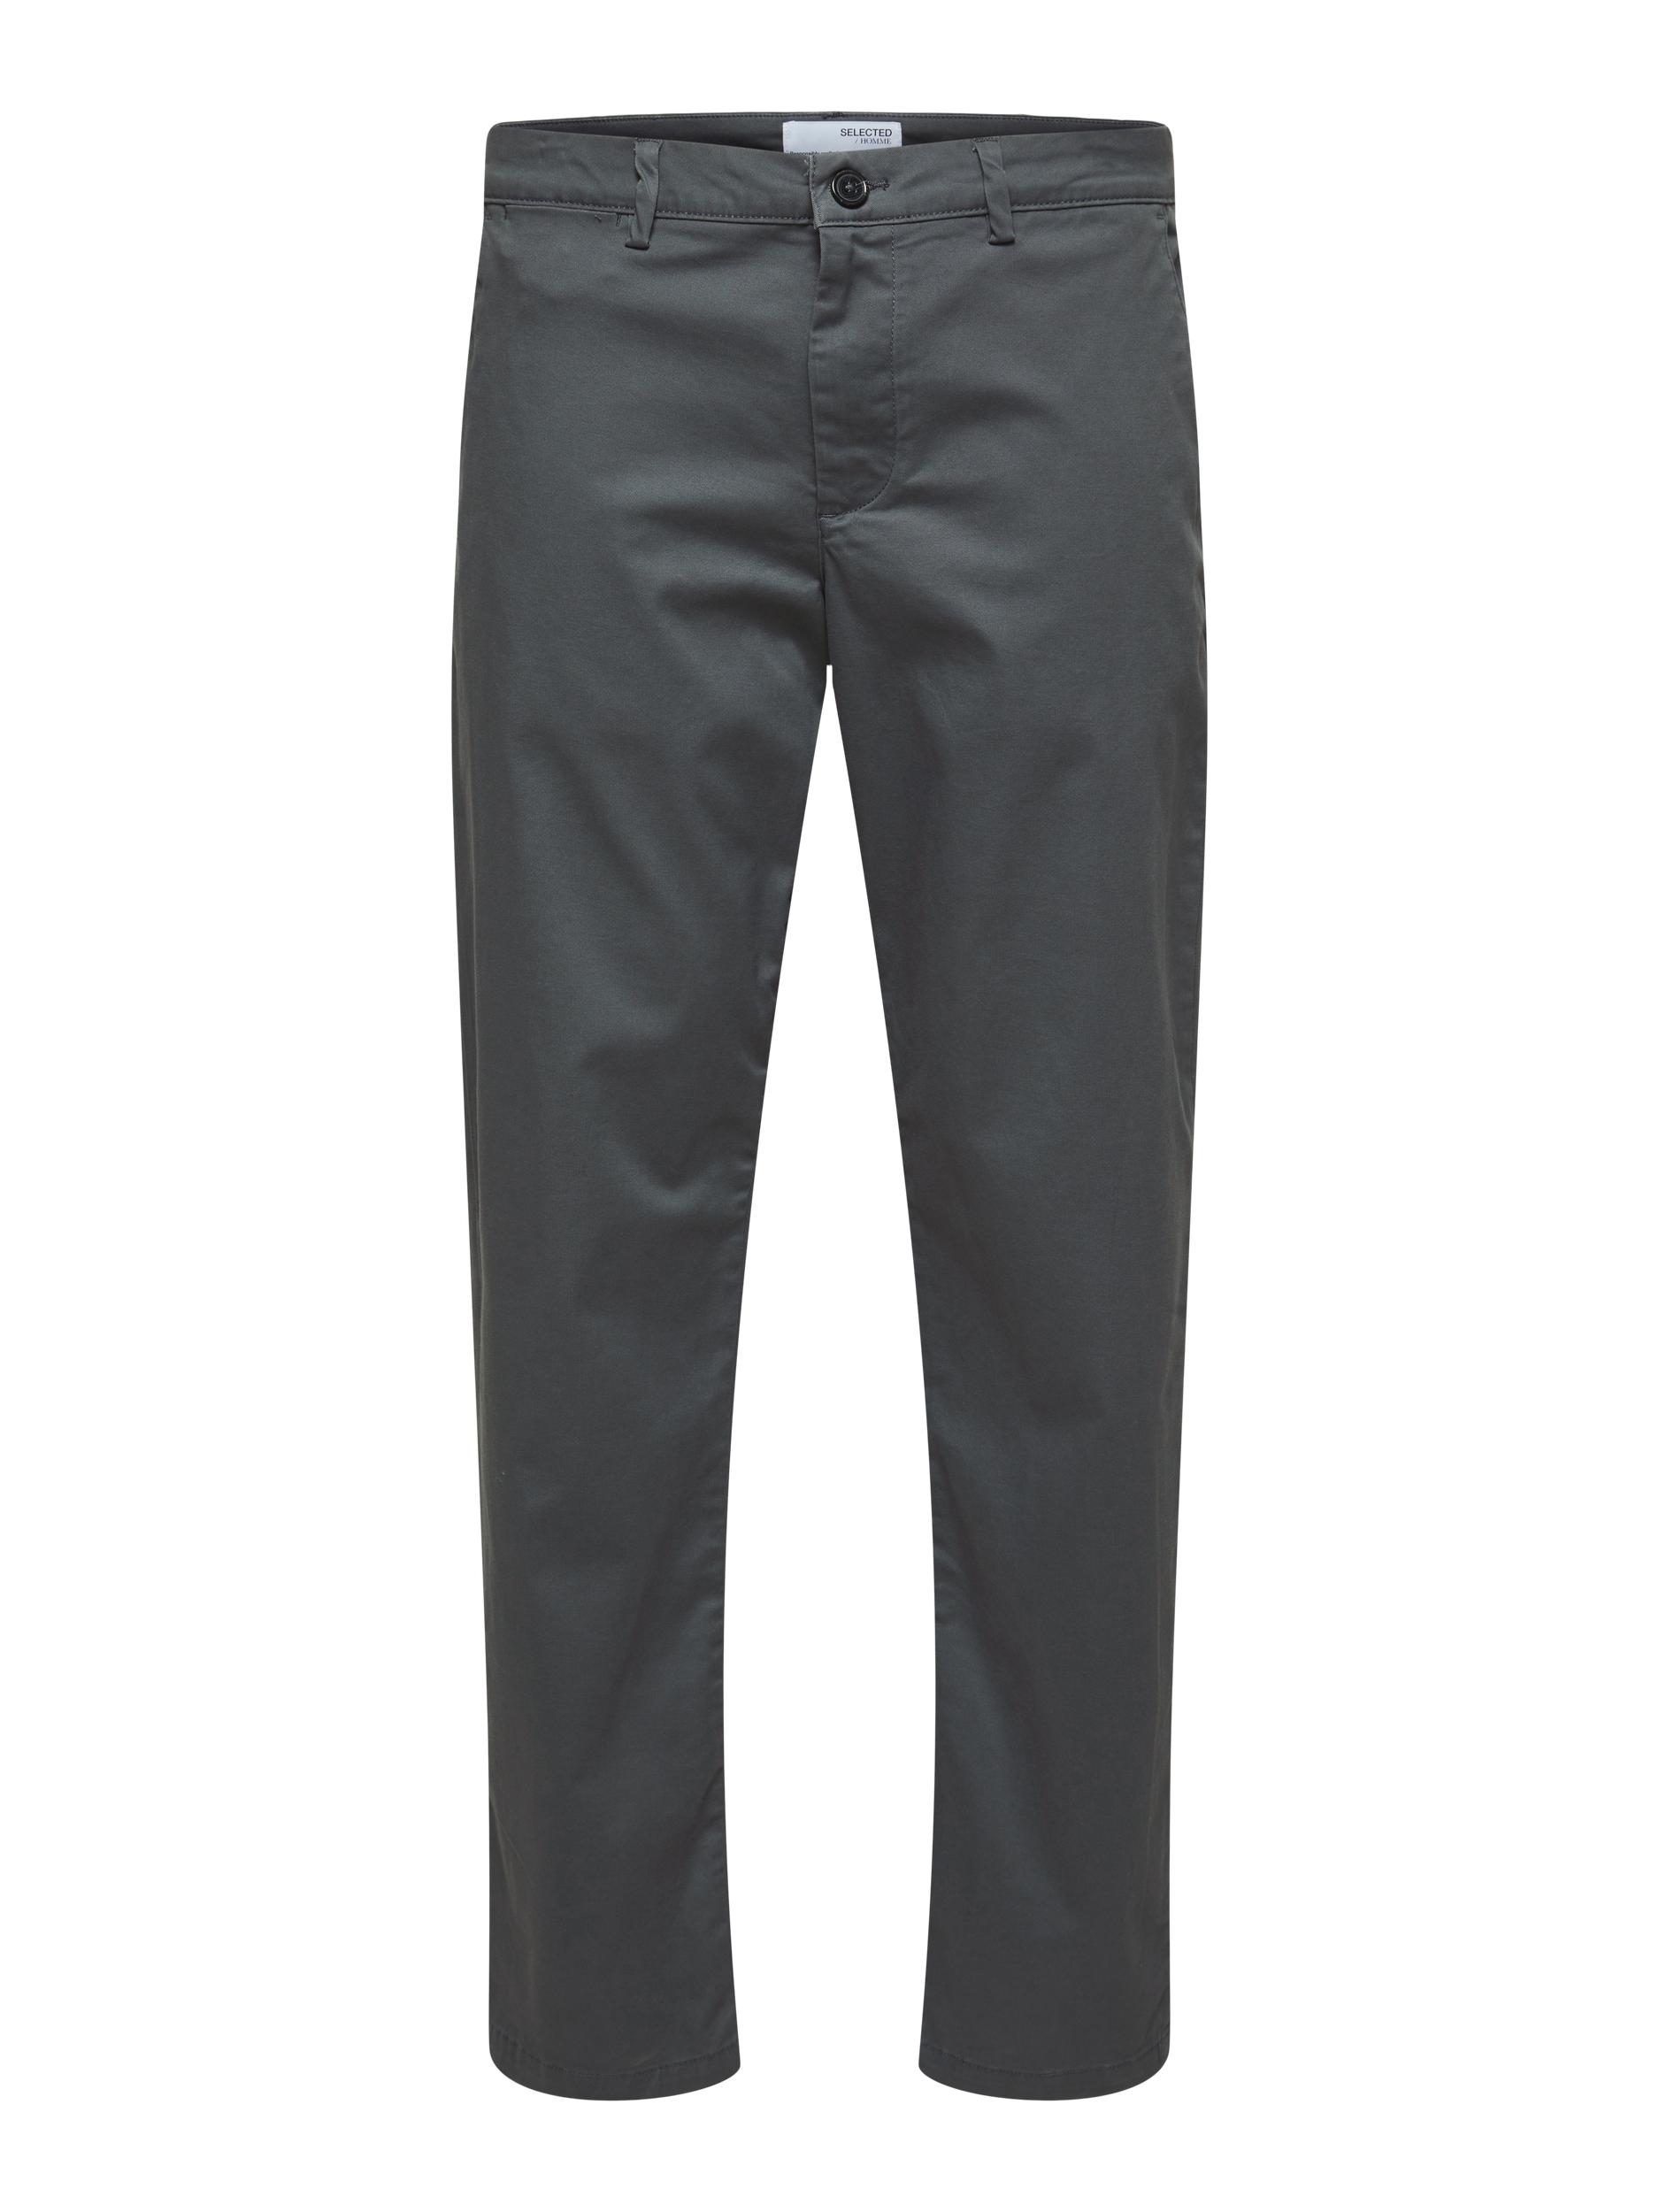 SELECTED HOMME Stoffhose »SLH196-STRAIGHT-NEW MILES FLEX PANT NOOS« von SELECTED HOMME